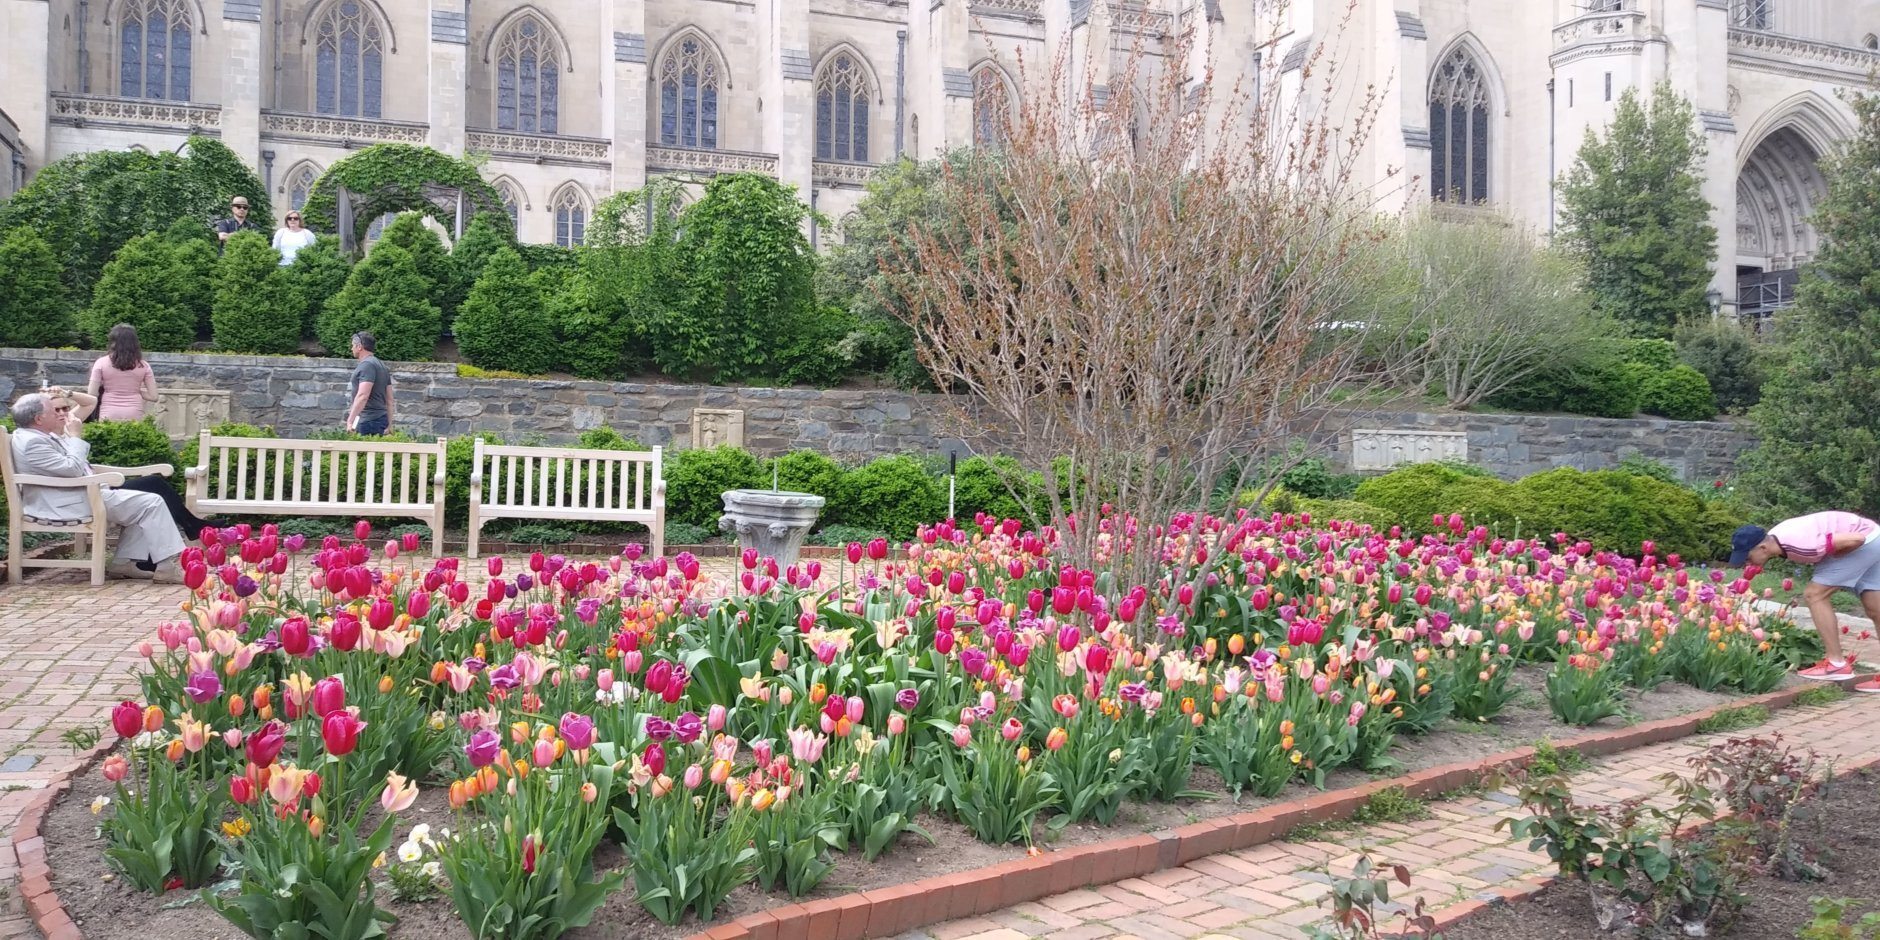 Tulips bloom in the Bishop's Garden at the Washington National Cathedral. (WTOP/Abigail Constantino)